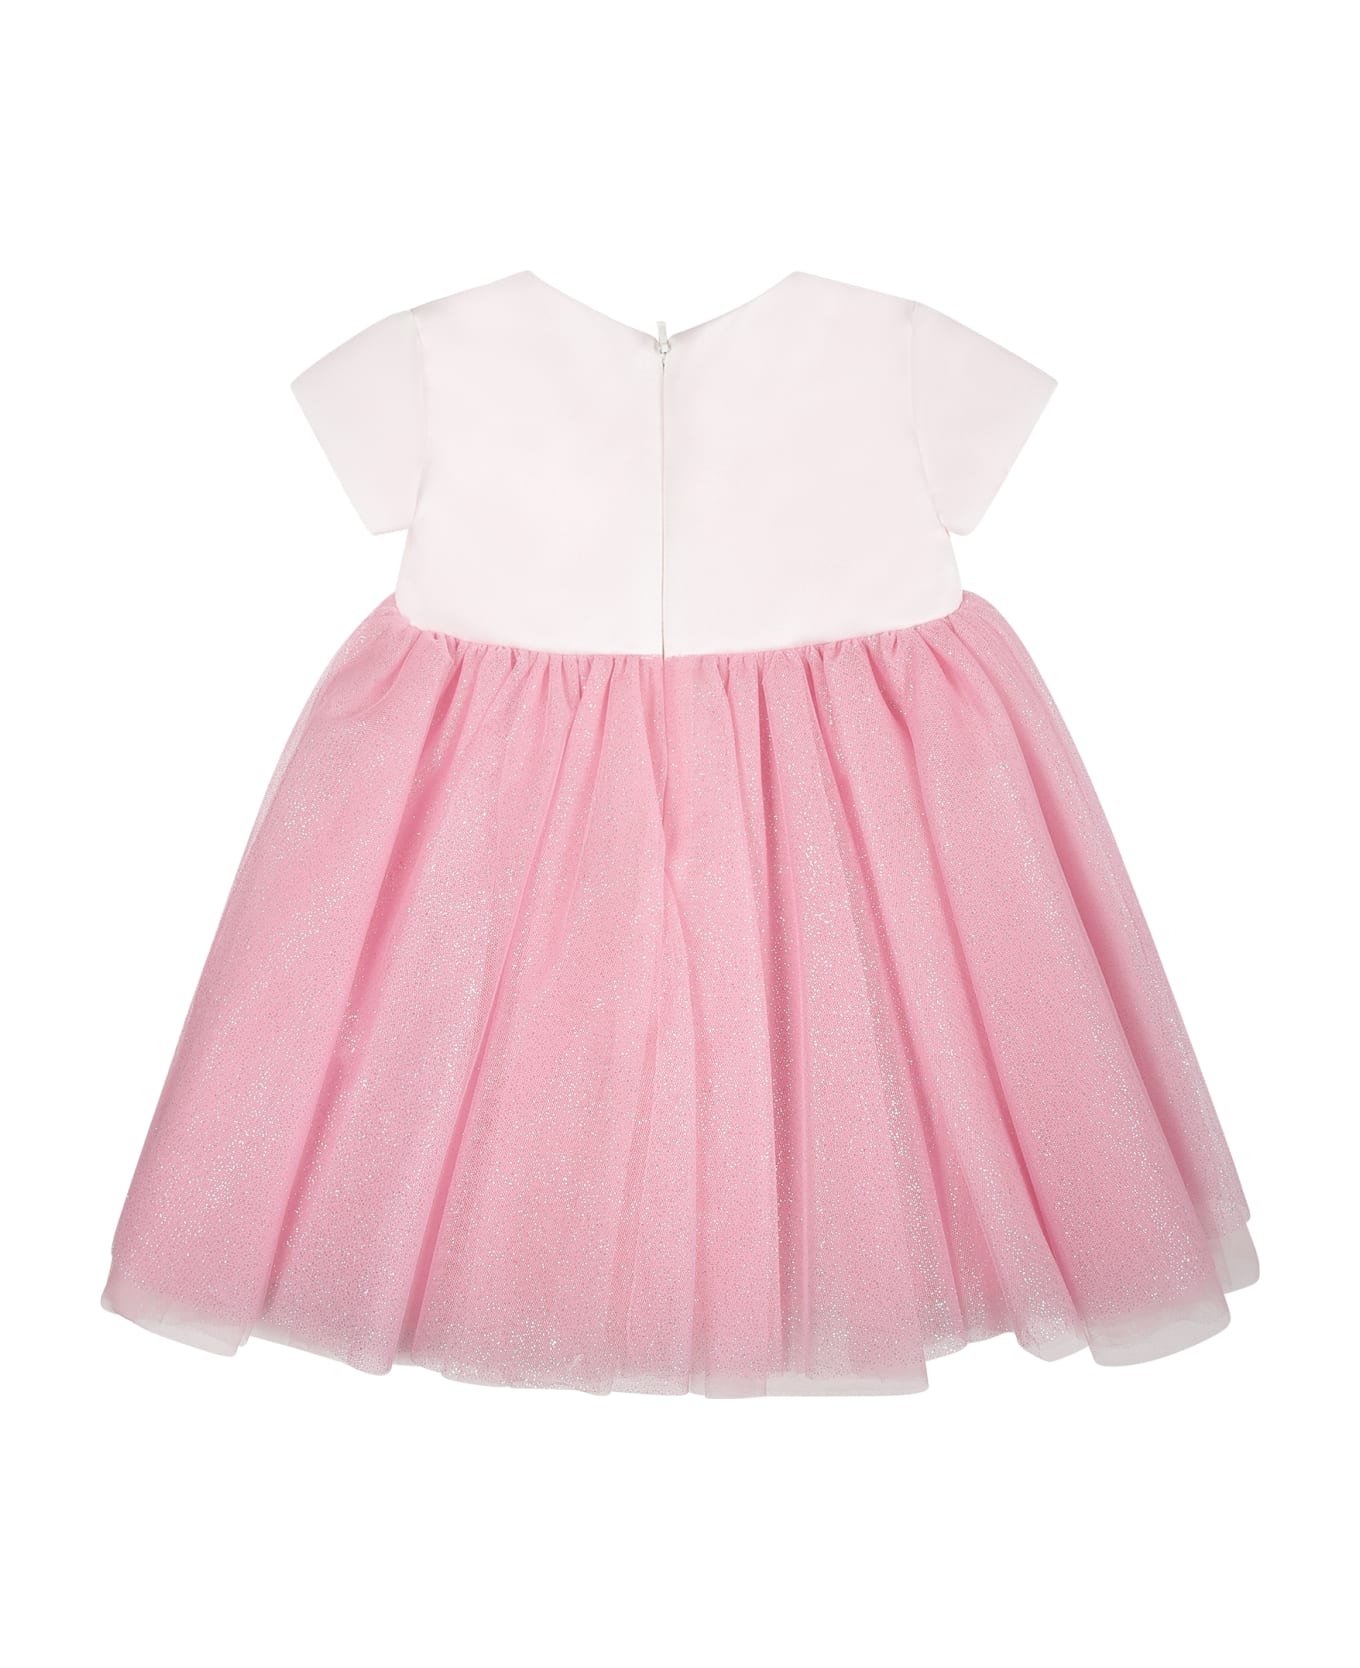 Monnalisa Pink Dress For Baby Girl With Daisies And Lurex - Pink